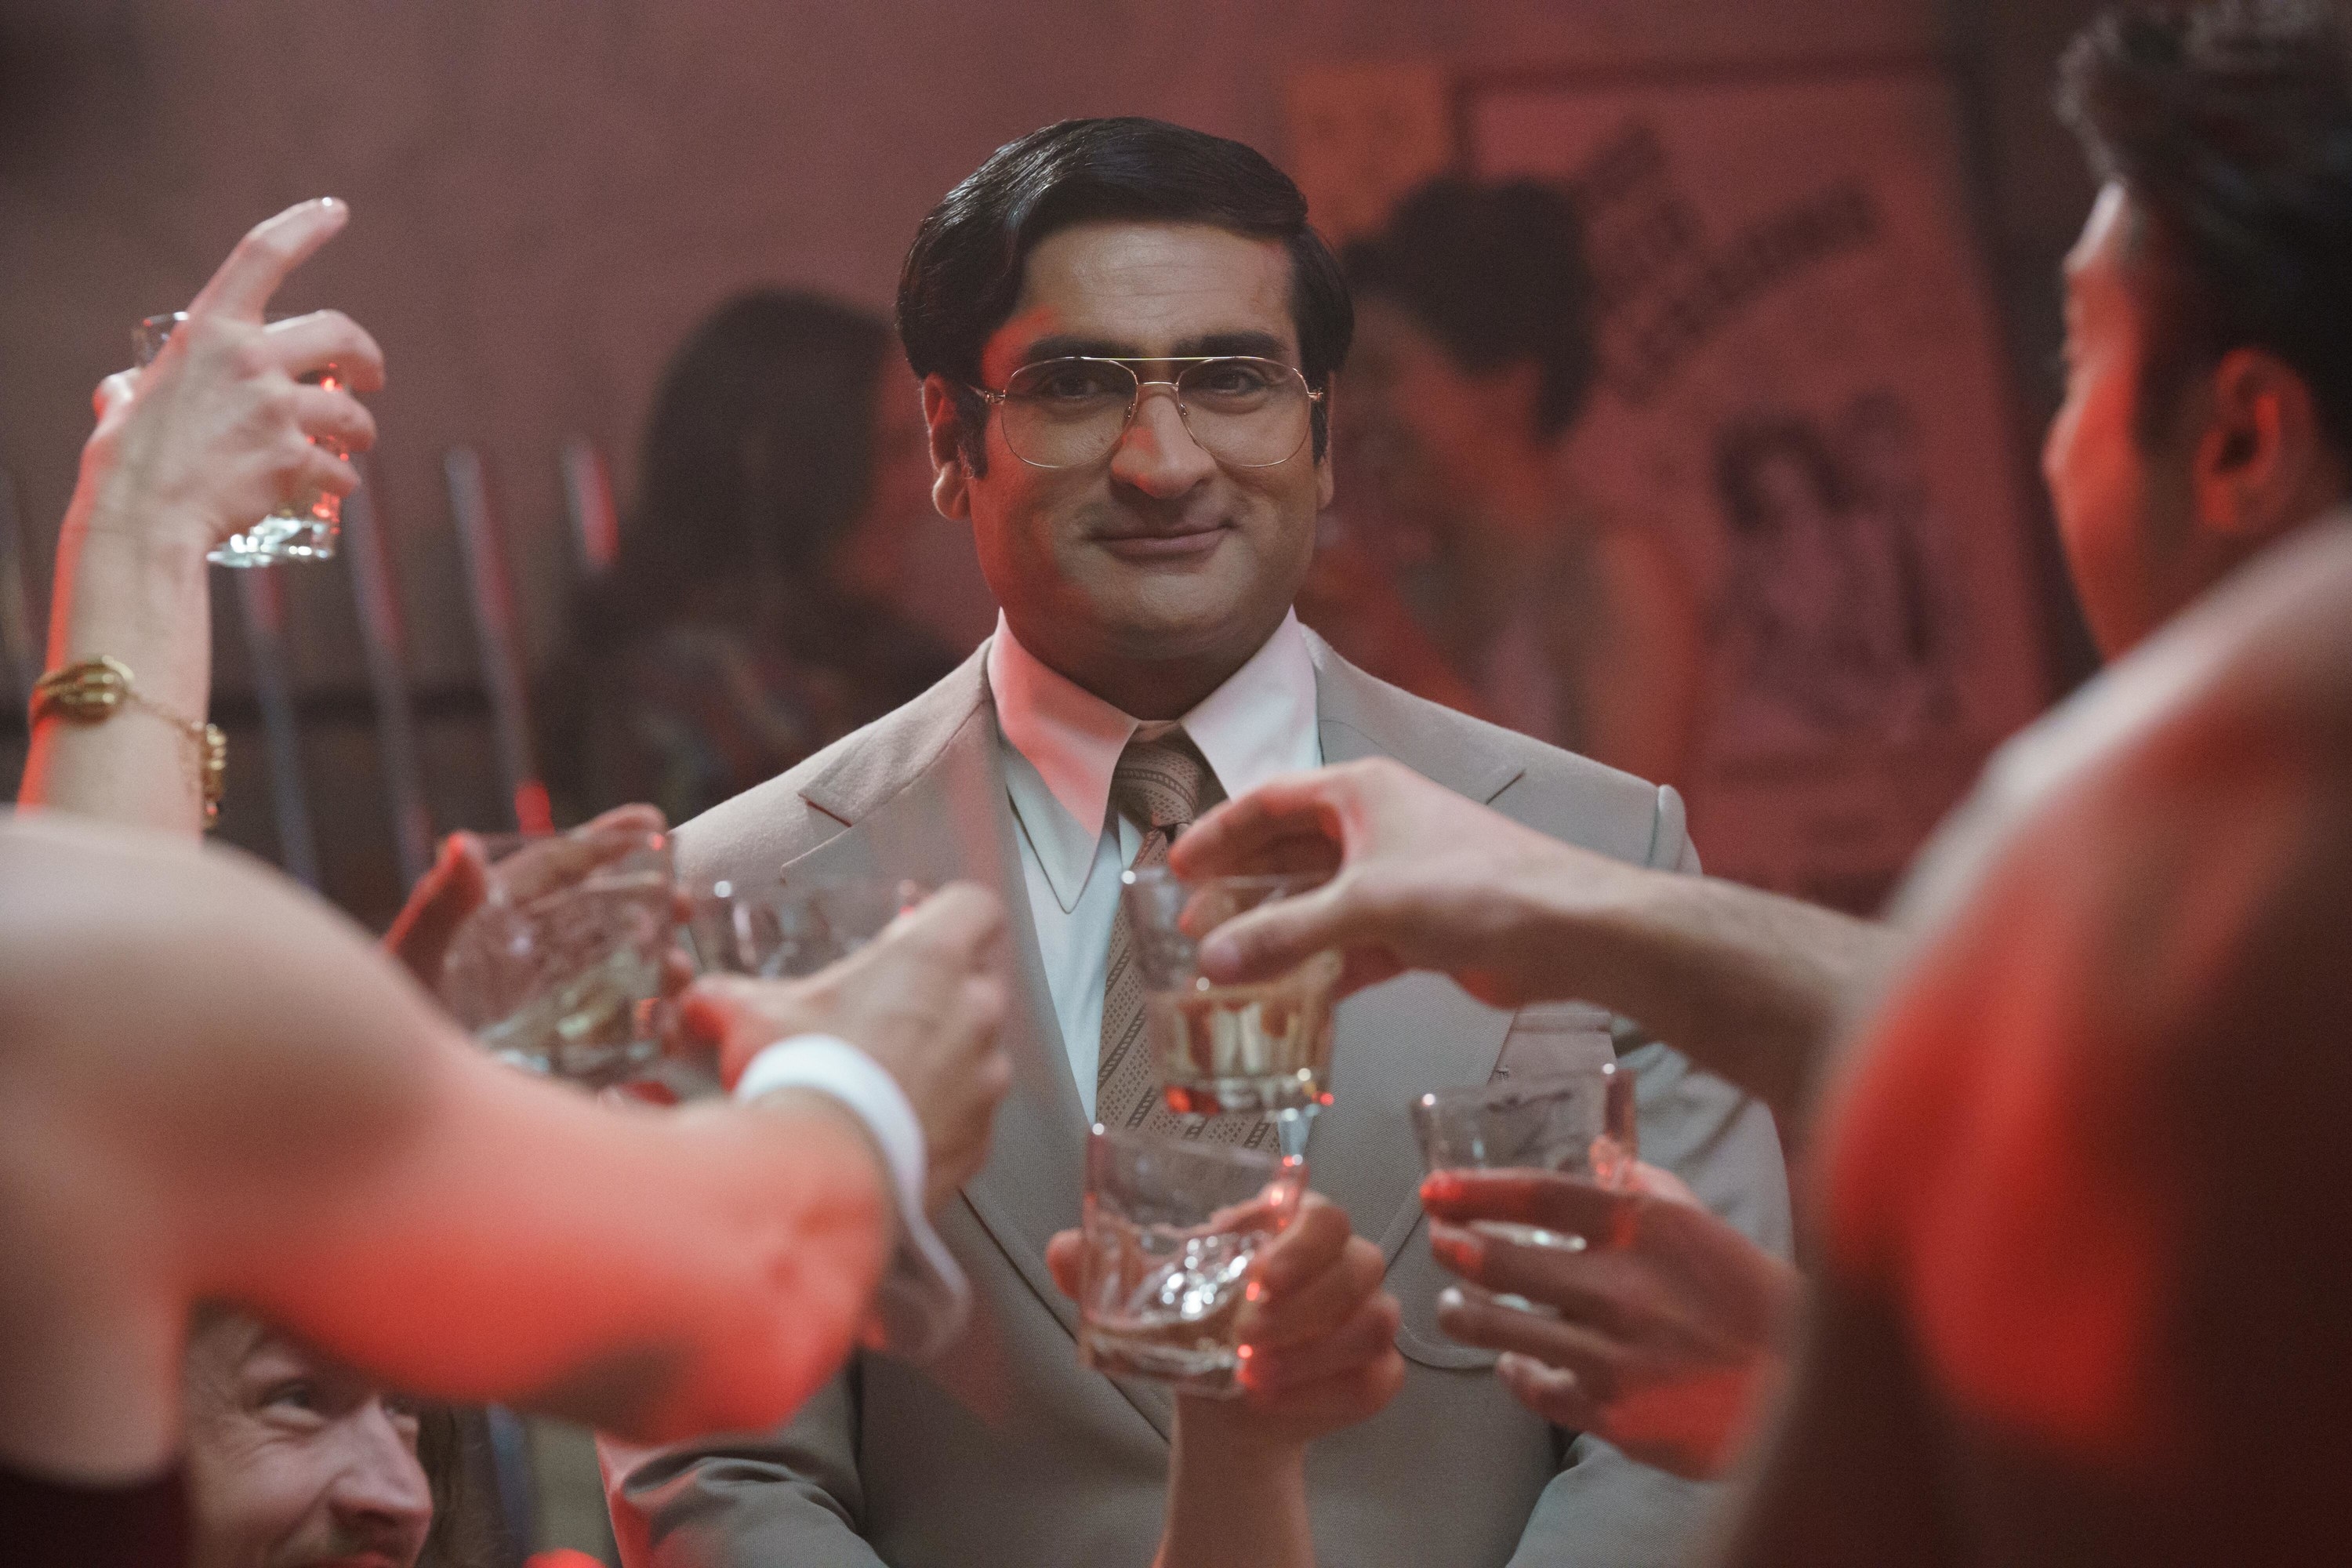 Kumail Nanjiani smiling in a bar as people clink their glasses